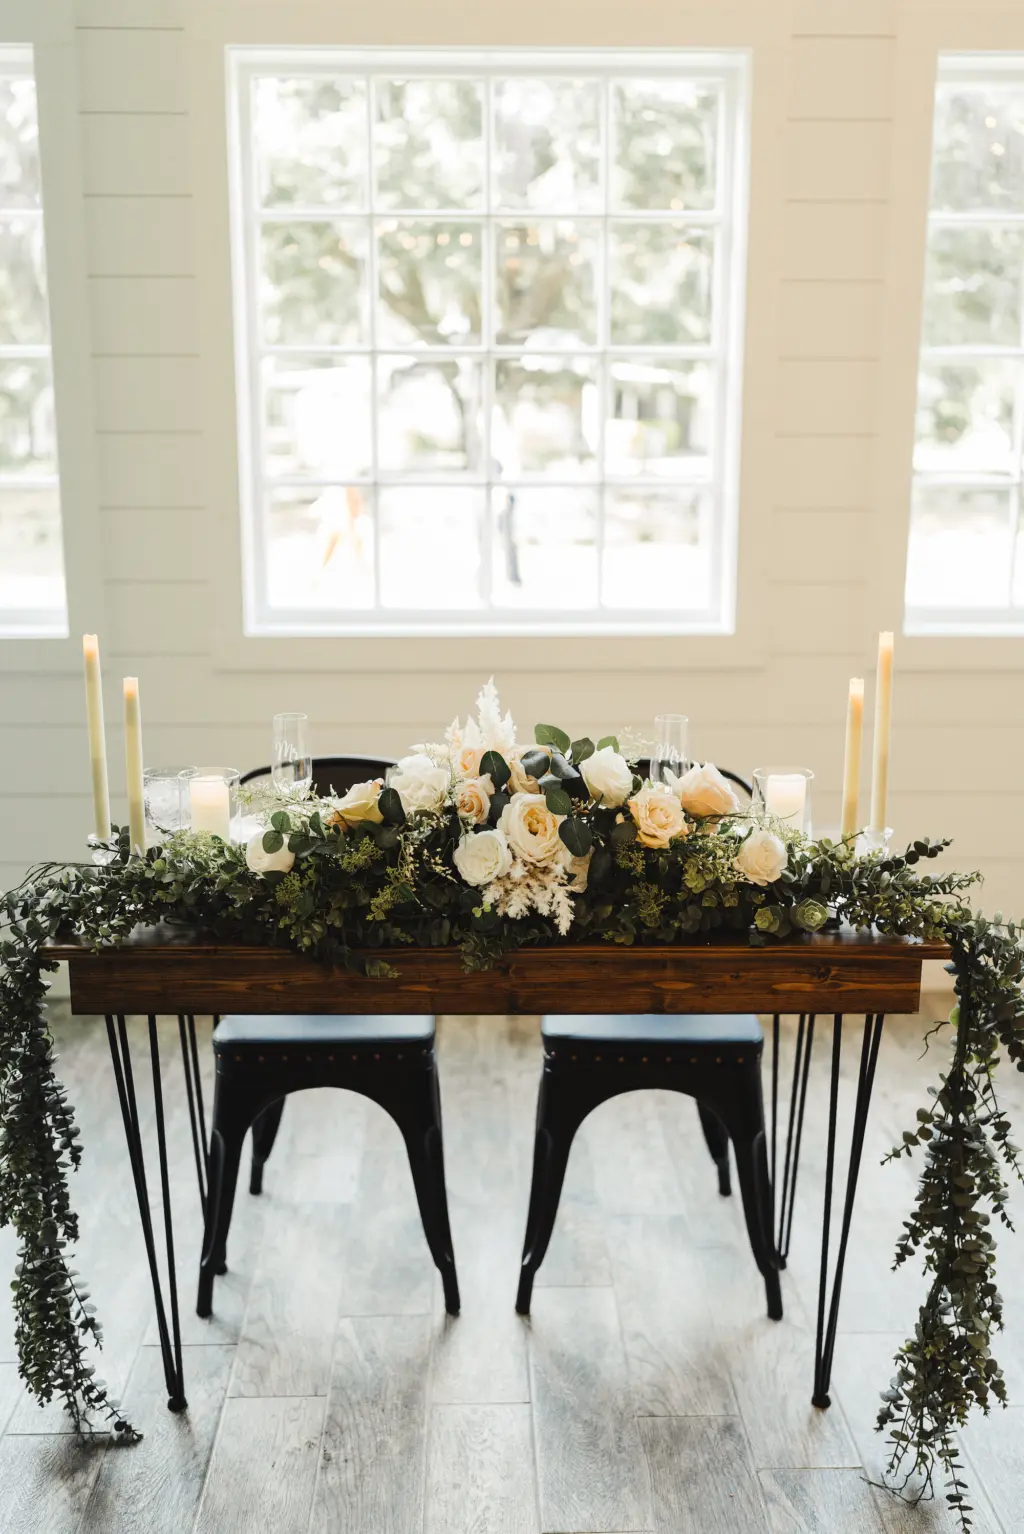 Sweetheart Head Table with Eucalyptus Greenery Garland | Taper Candles | White and Blush Roses Tabletop Flower Arrangement Ideas | Tampa Bay Florist Monarch Events and Design